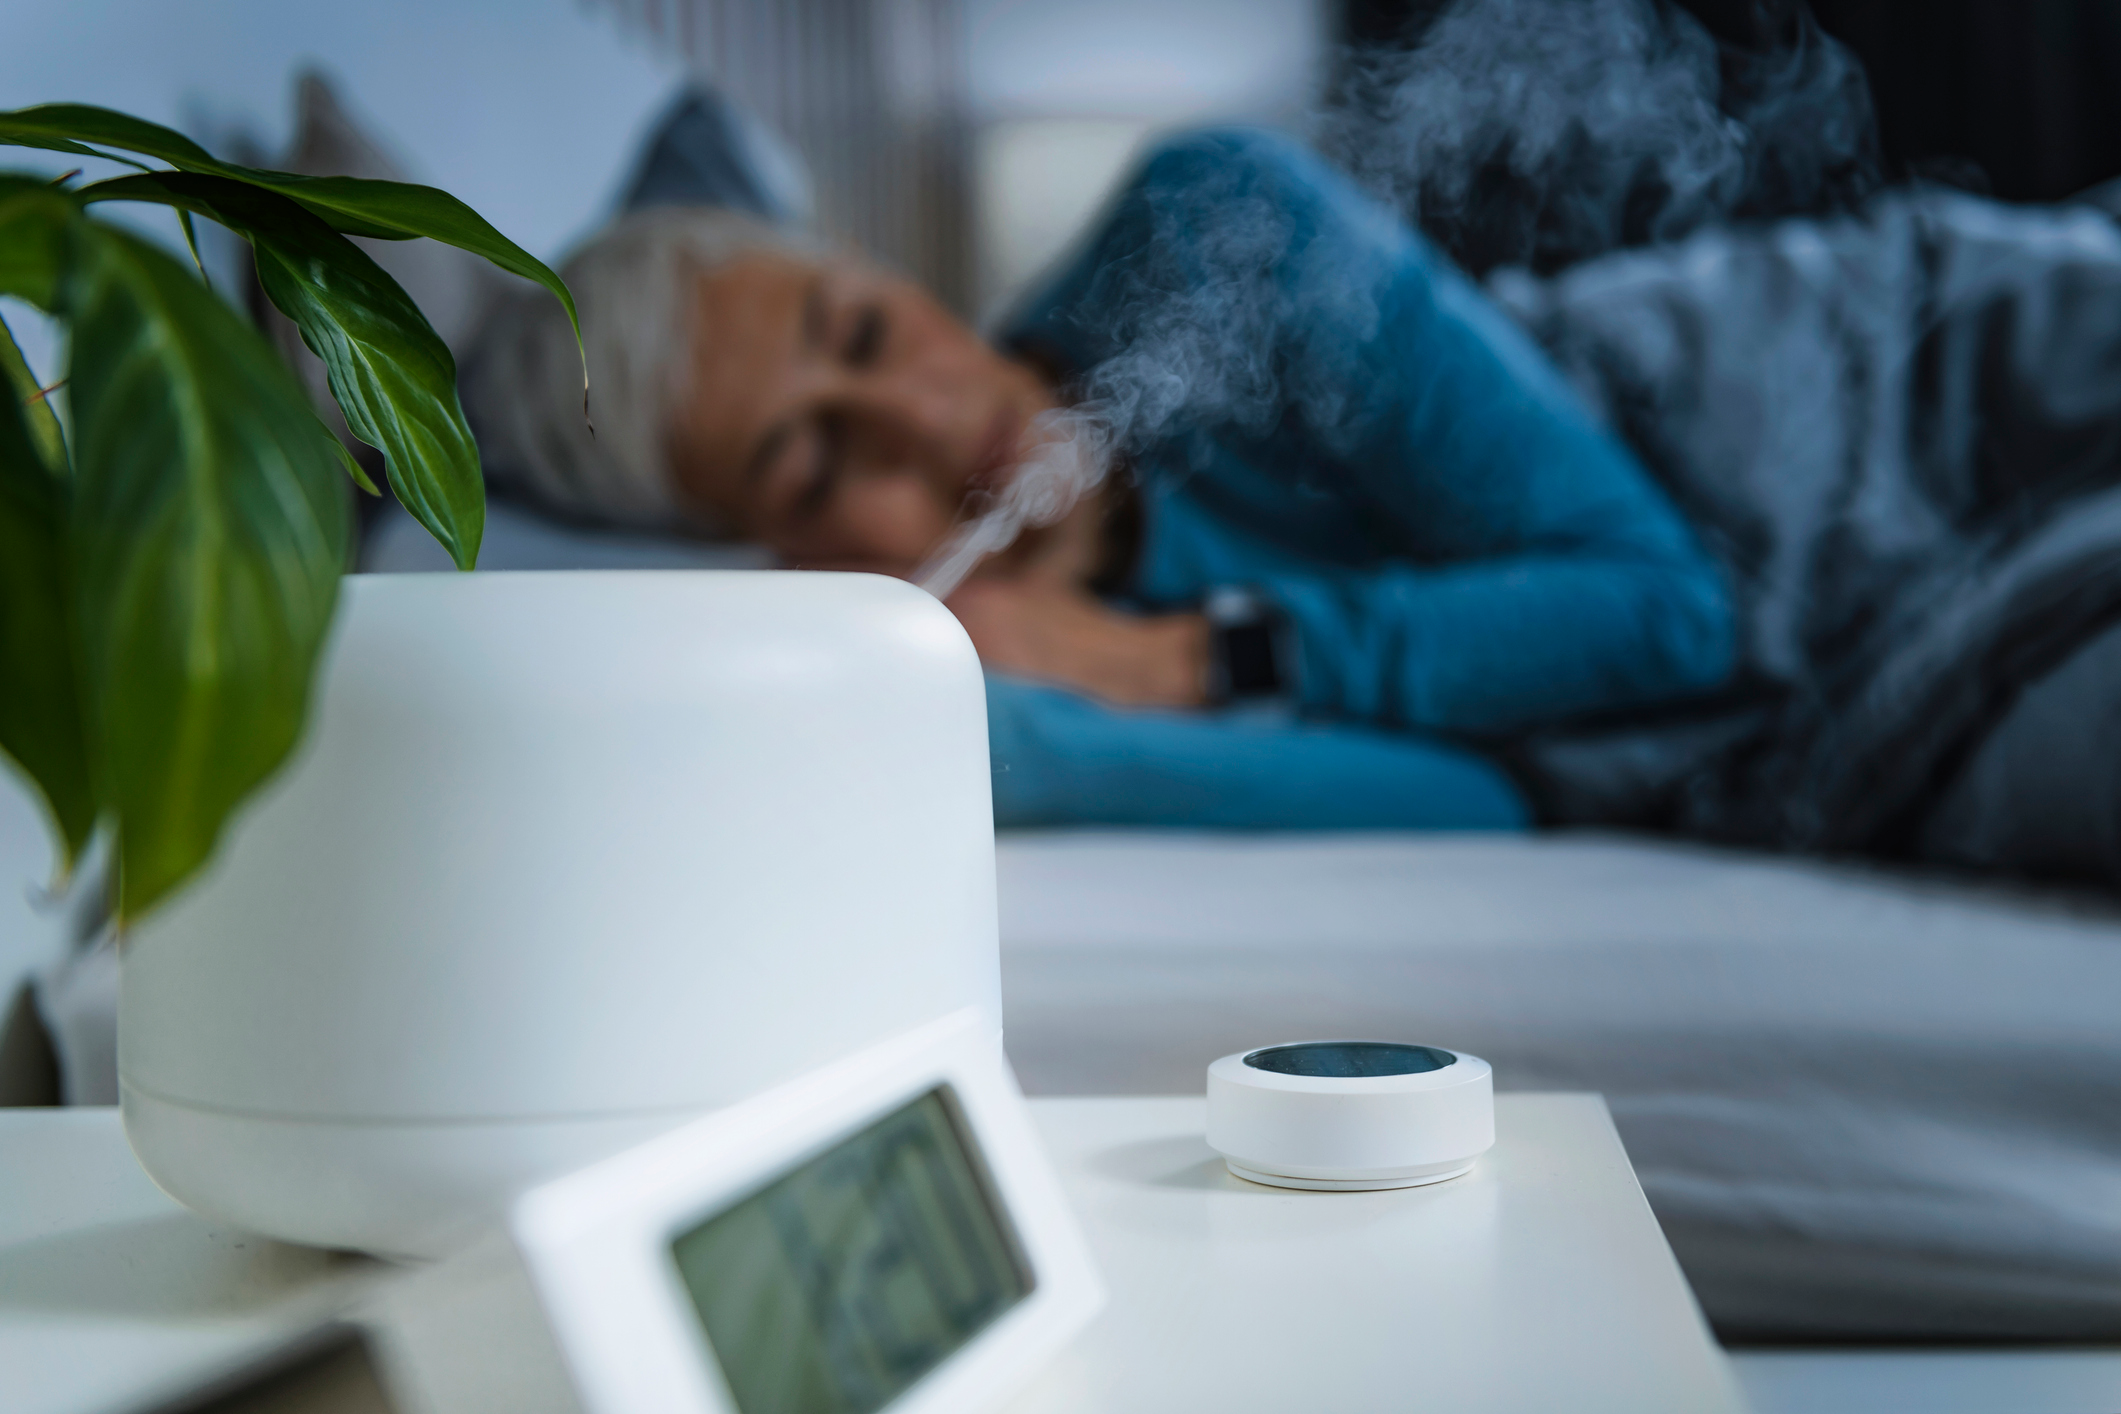 An image of a humidifier emitting steam while a mature woman sleeps in bed, one of the throat hygiene tips for hydration and humidification.